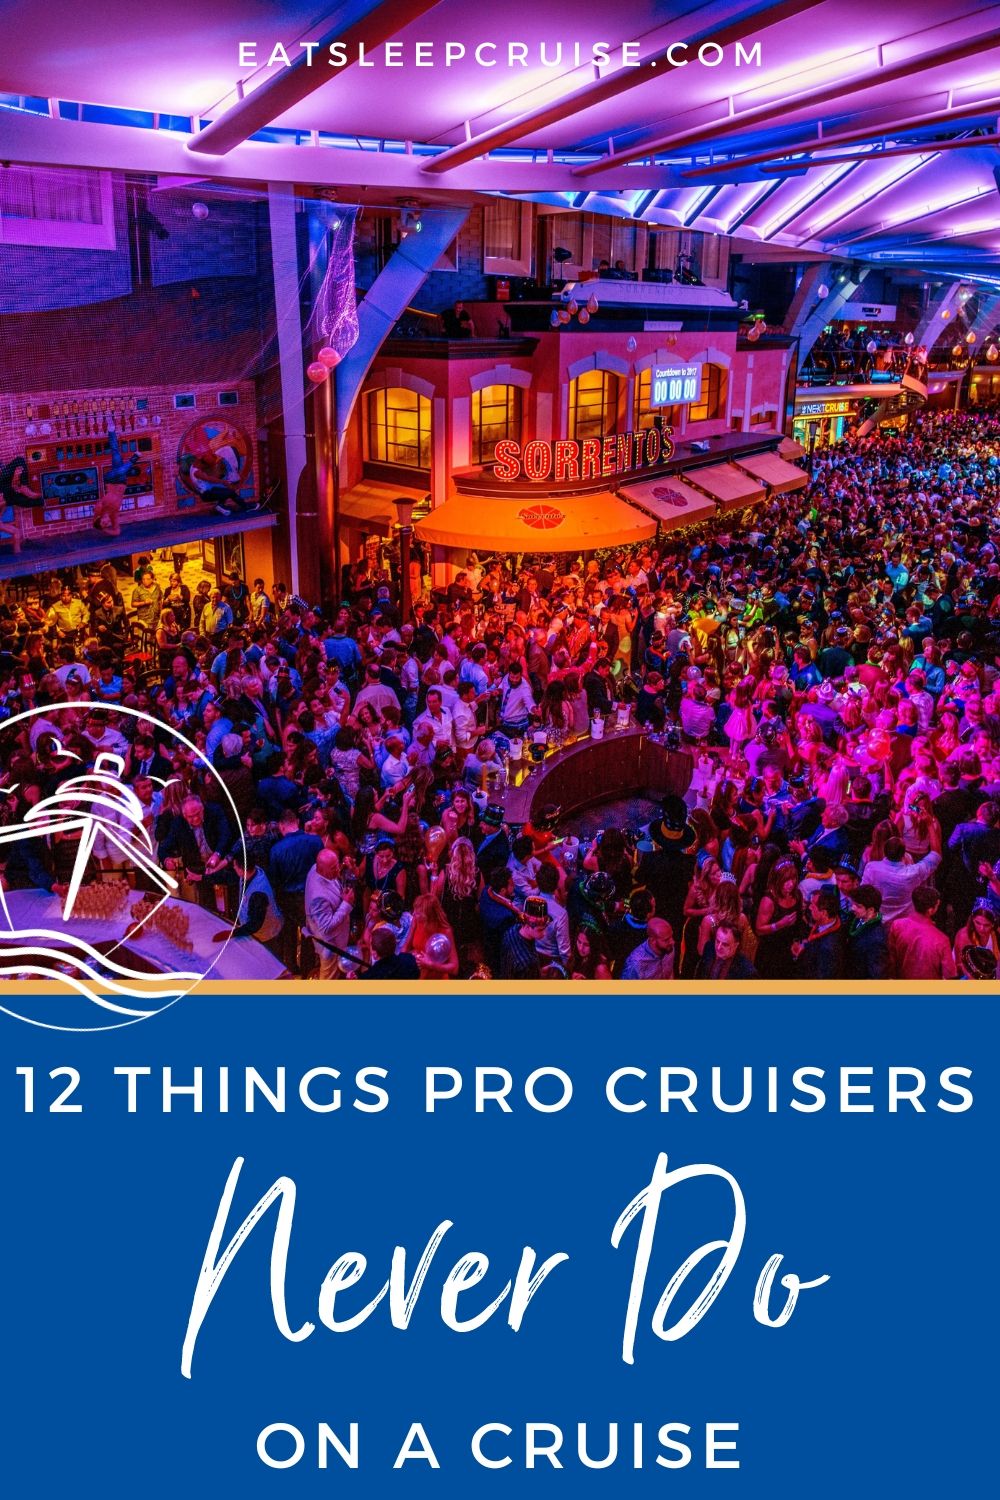 The 12 Things You’ll Never Catch Pro Cruisers Doing on a Cruise